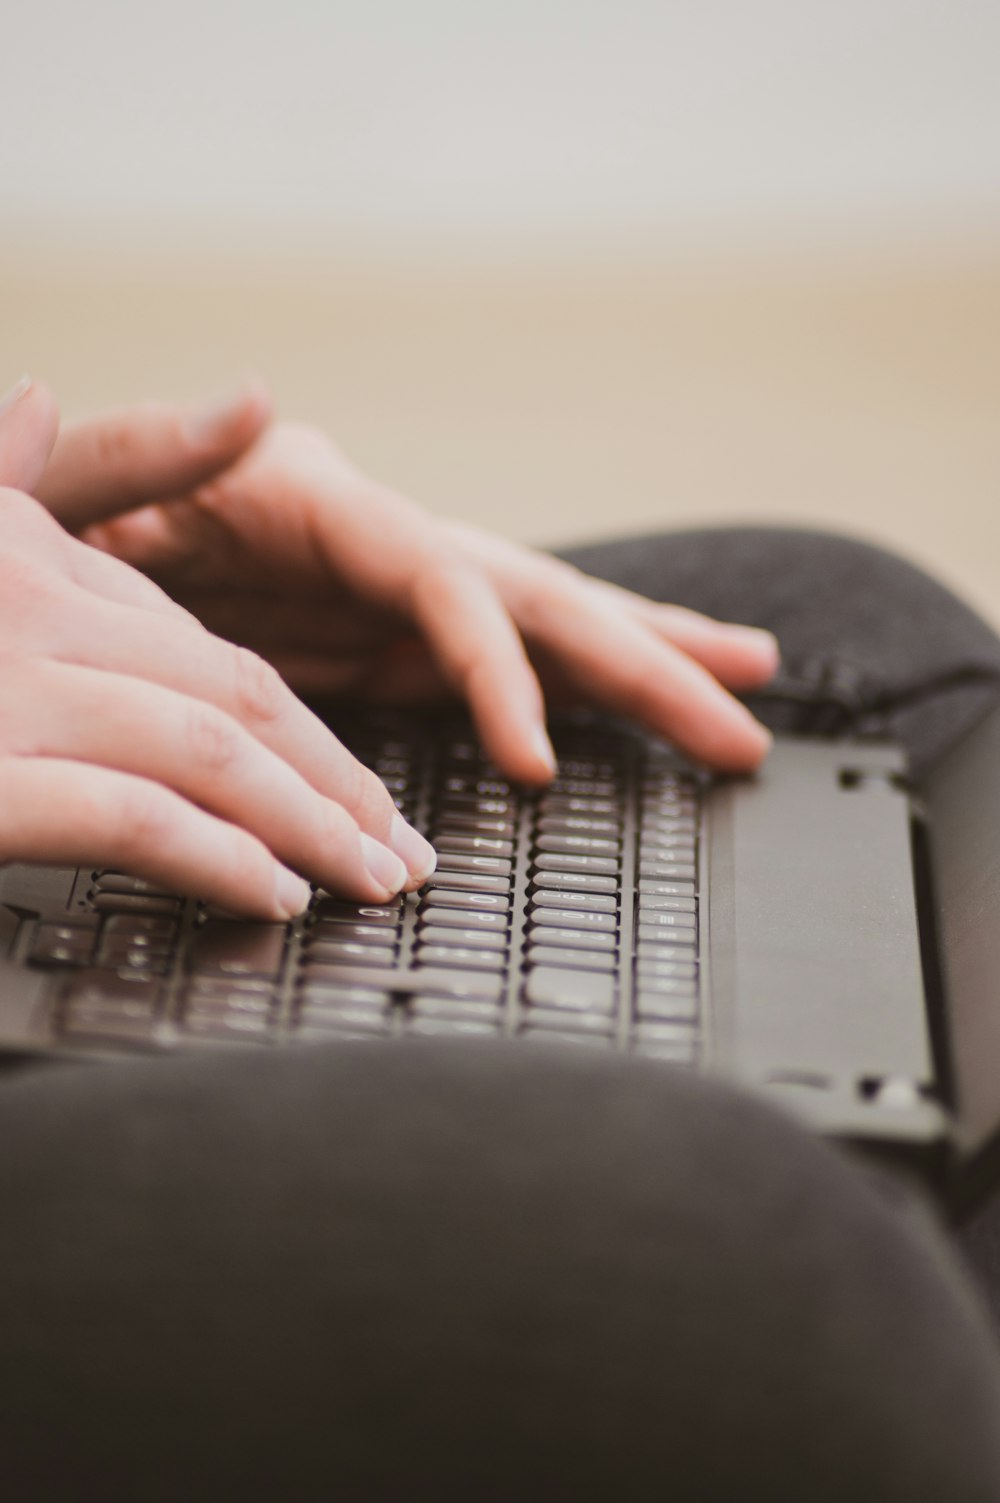 a woman's hands on a laptop keyboard